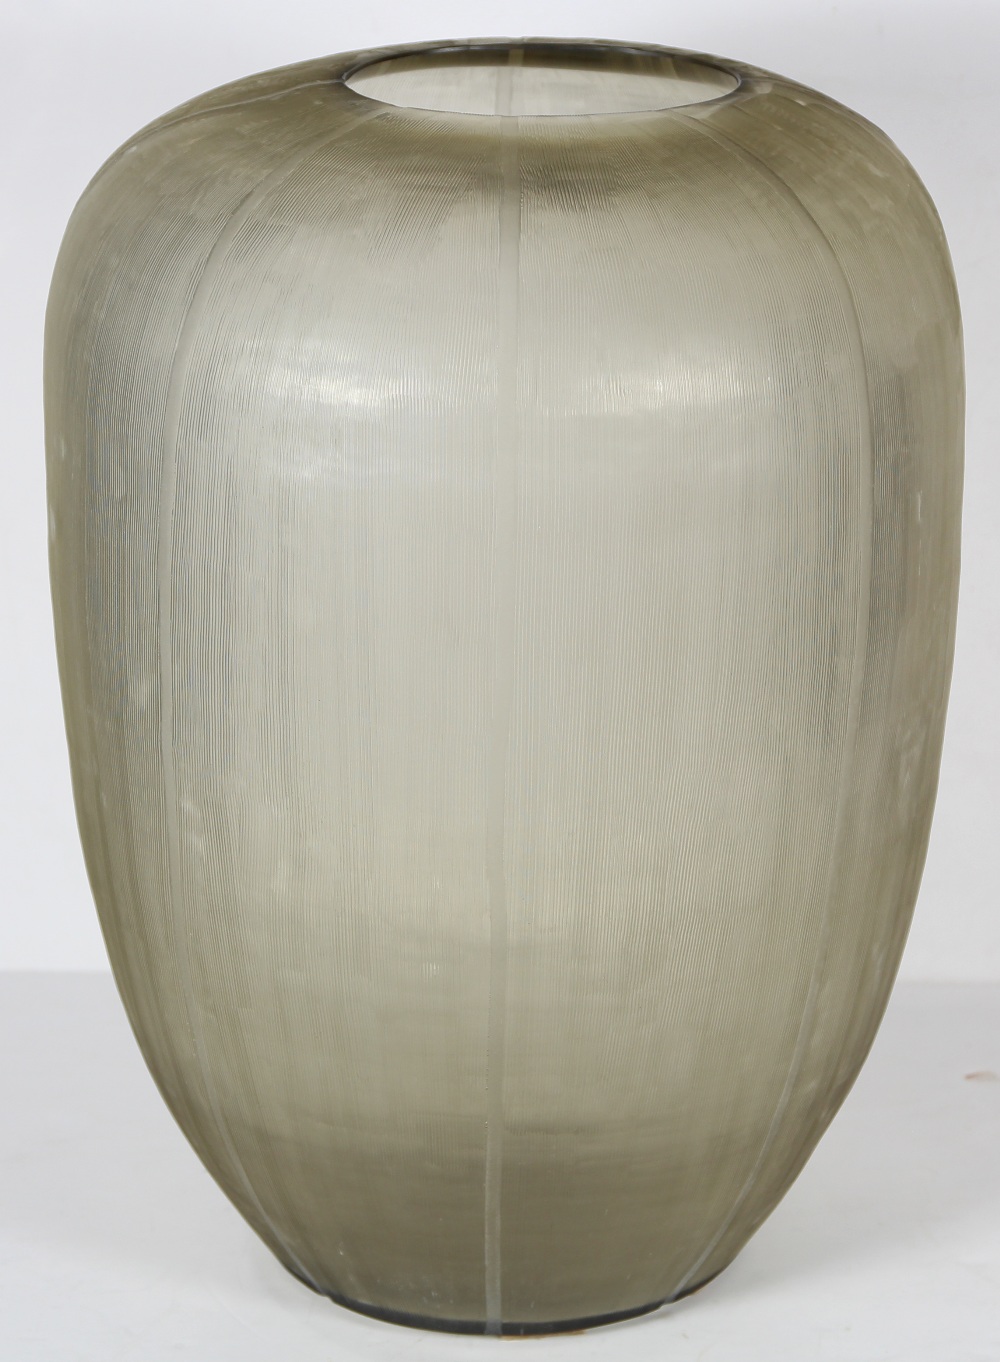 (lot of 2) Large Moderne etched and blown glass vase, by Donna Karan for Lenox, having a cylindrical - Image 3 of 10